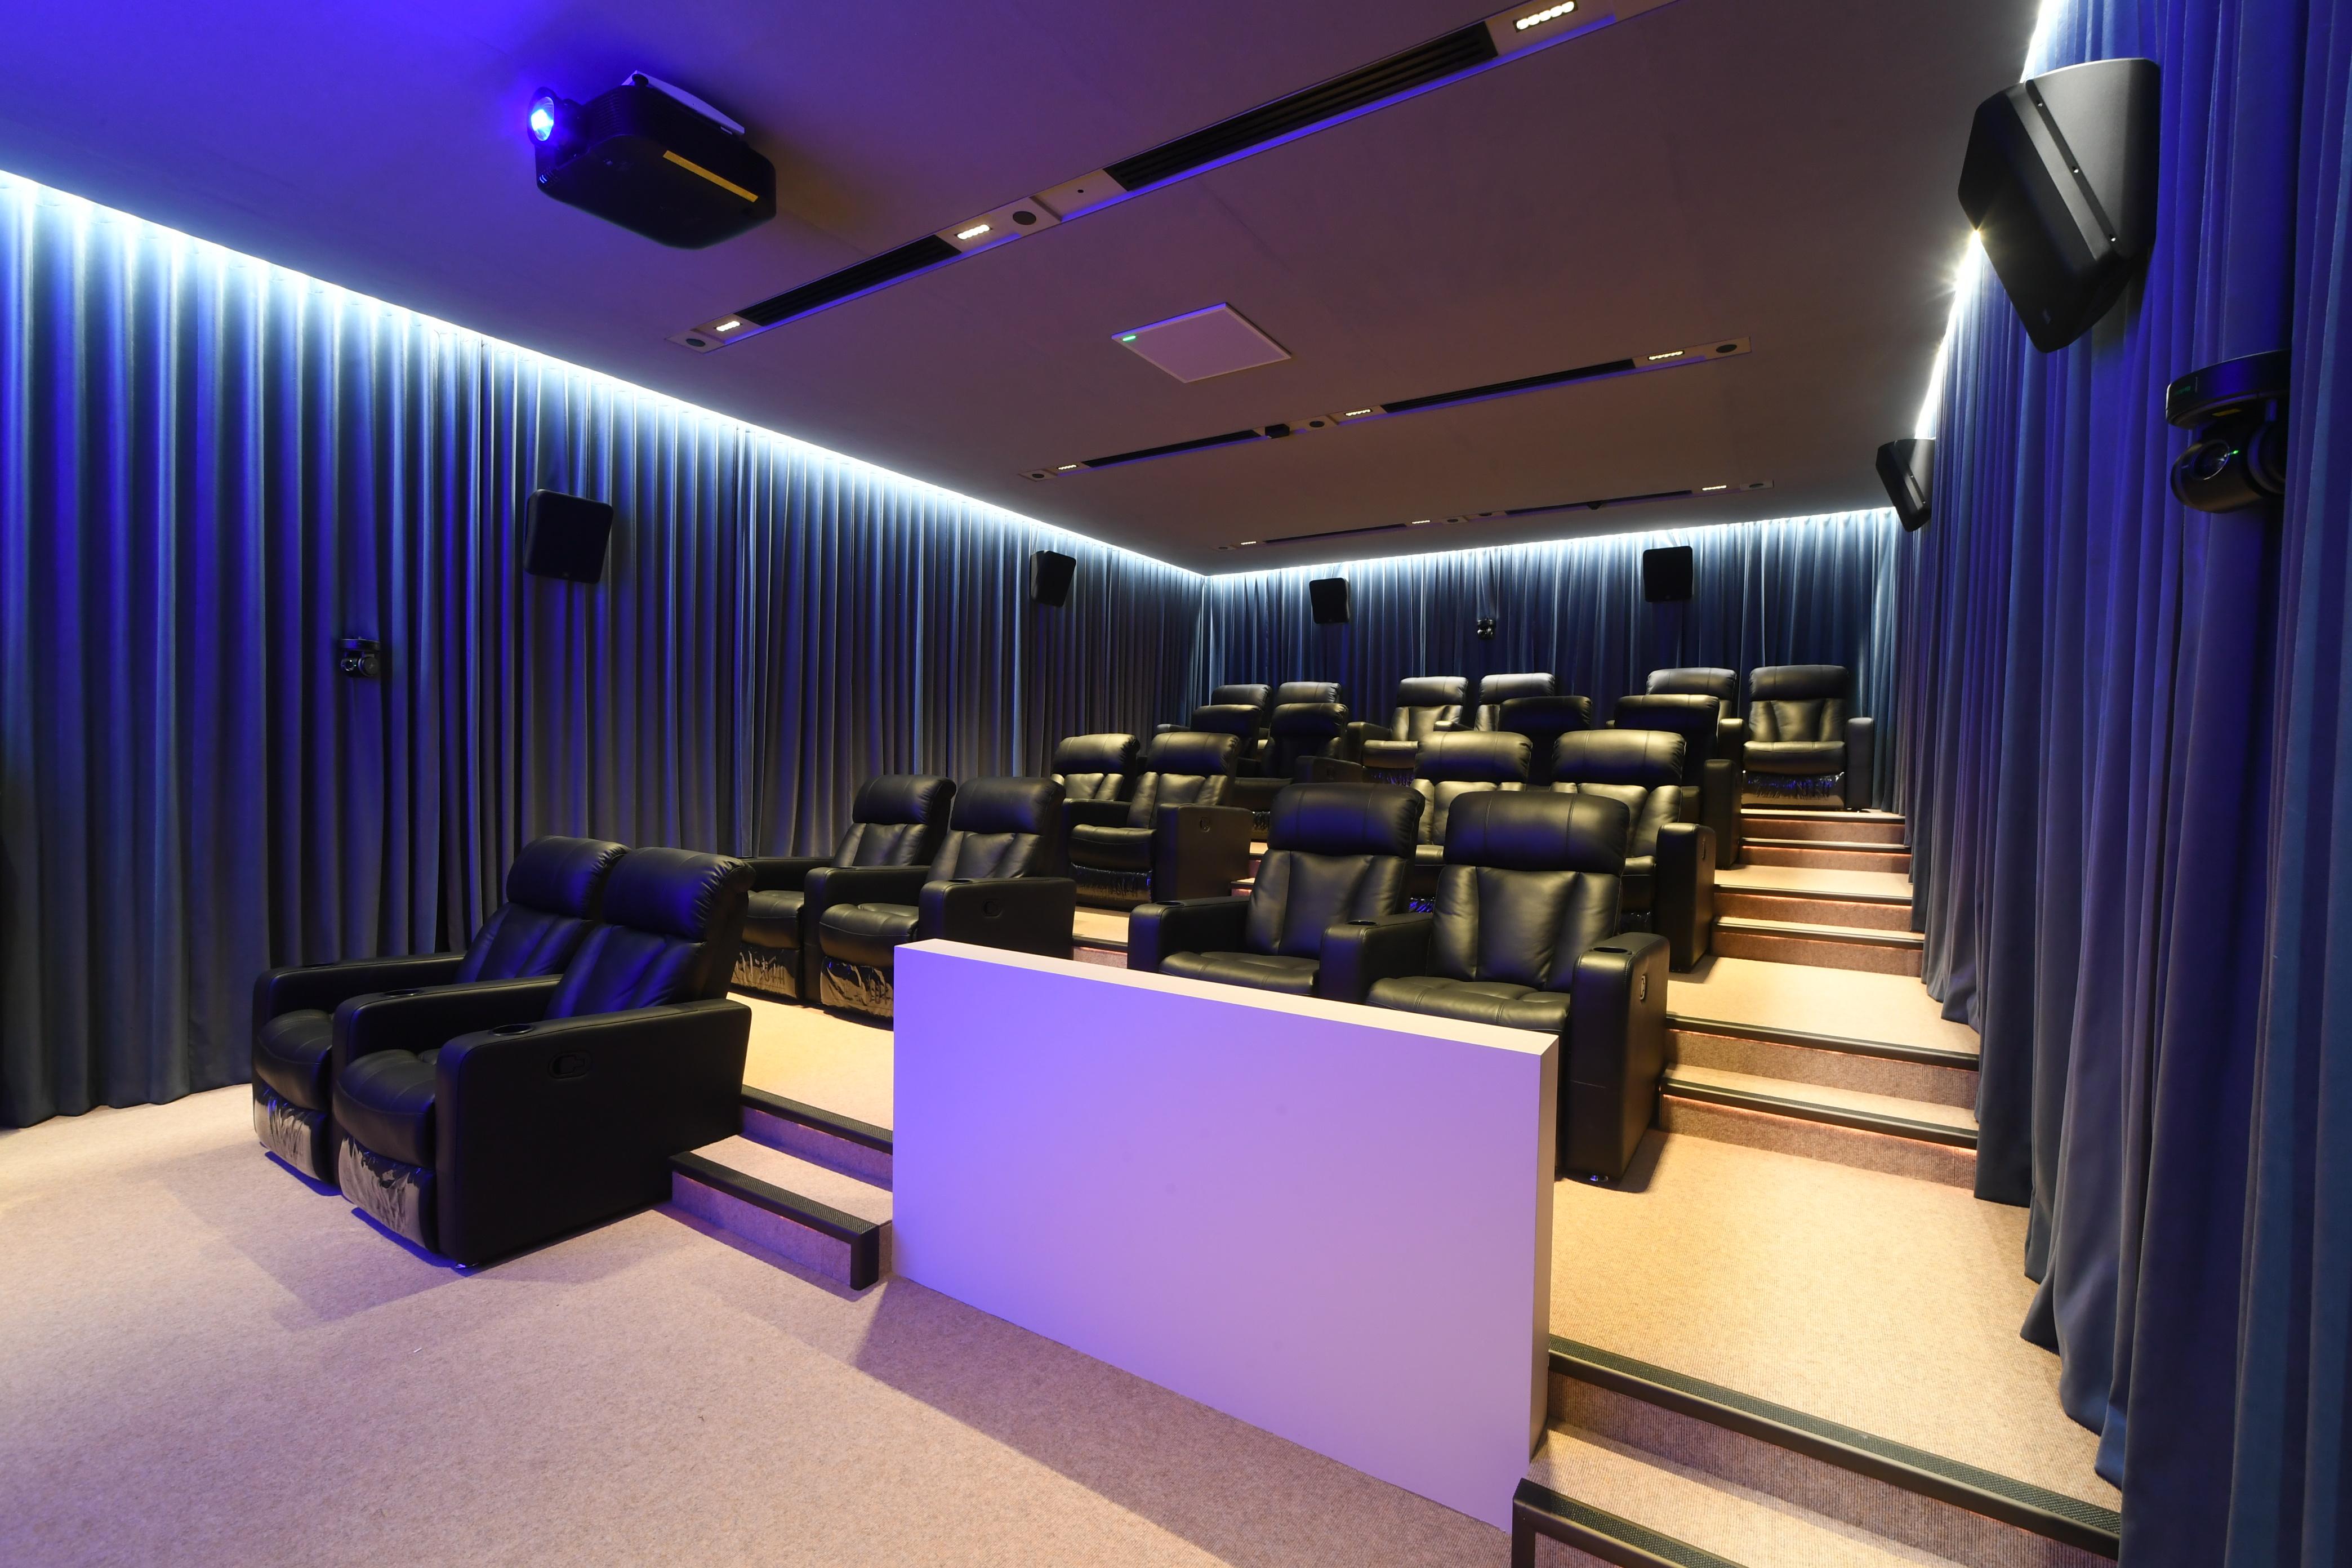 The theatre with 20 seated loungers and plenty of food and beverage options available, latest state-of-the-art lighting systems, speakers, and visual, the Theatre is a versatile space to stream, watch or present.